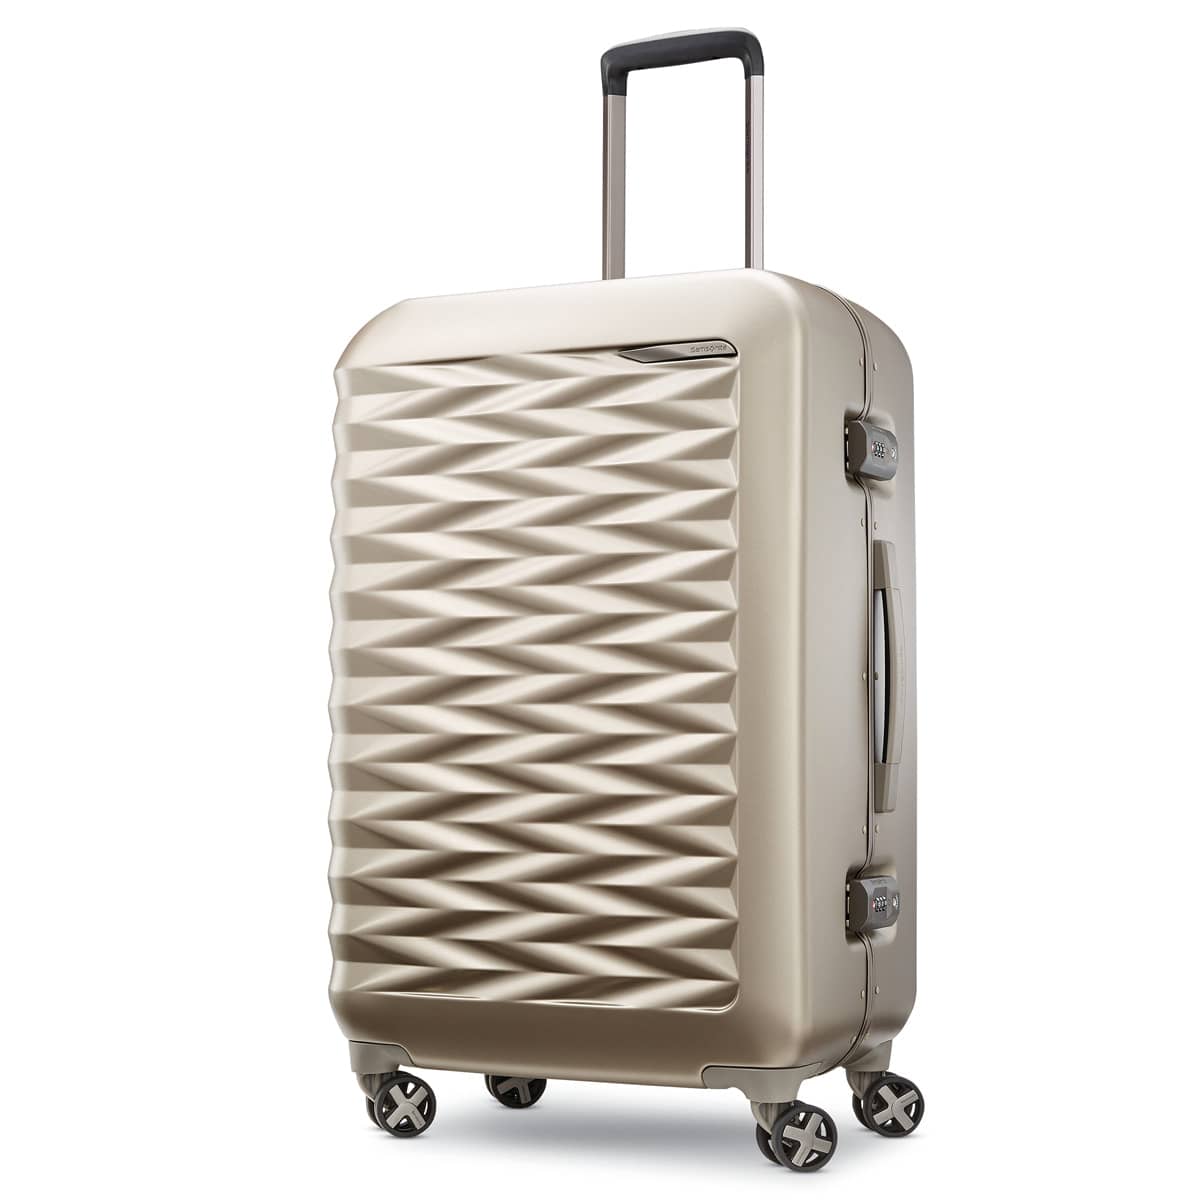 Best luggage deal in February 2022